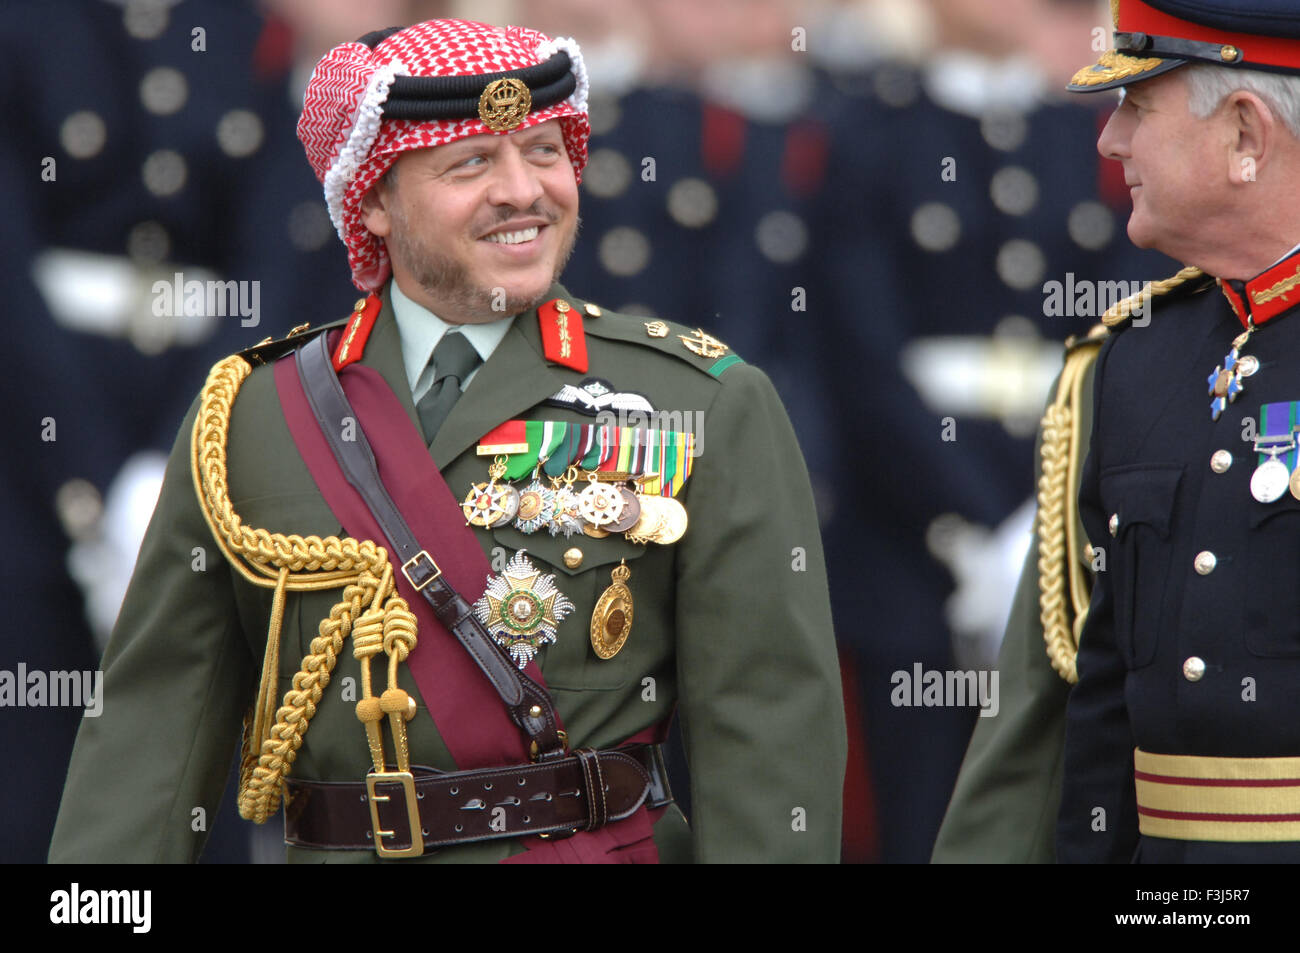 Army personal with medals on parade. Stock Photo